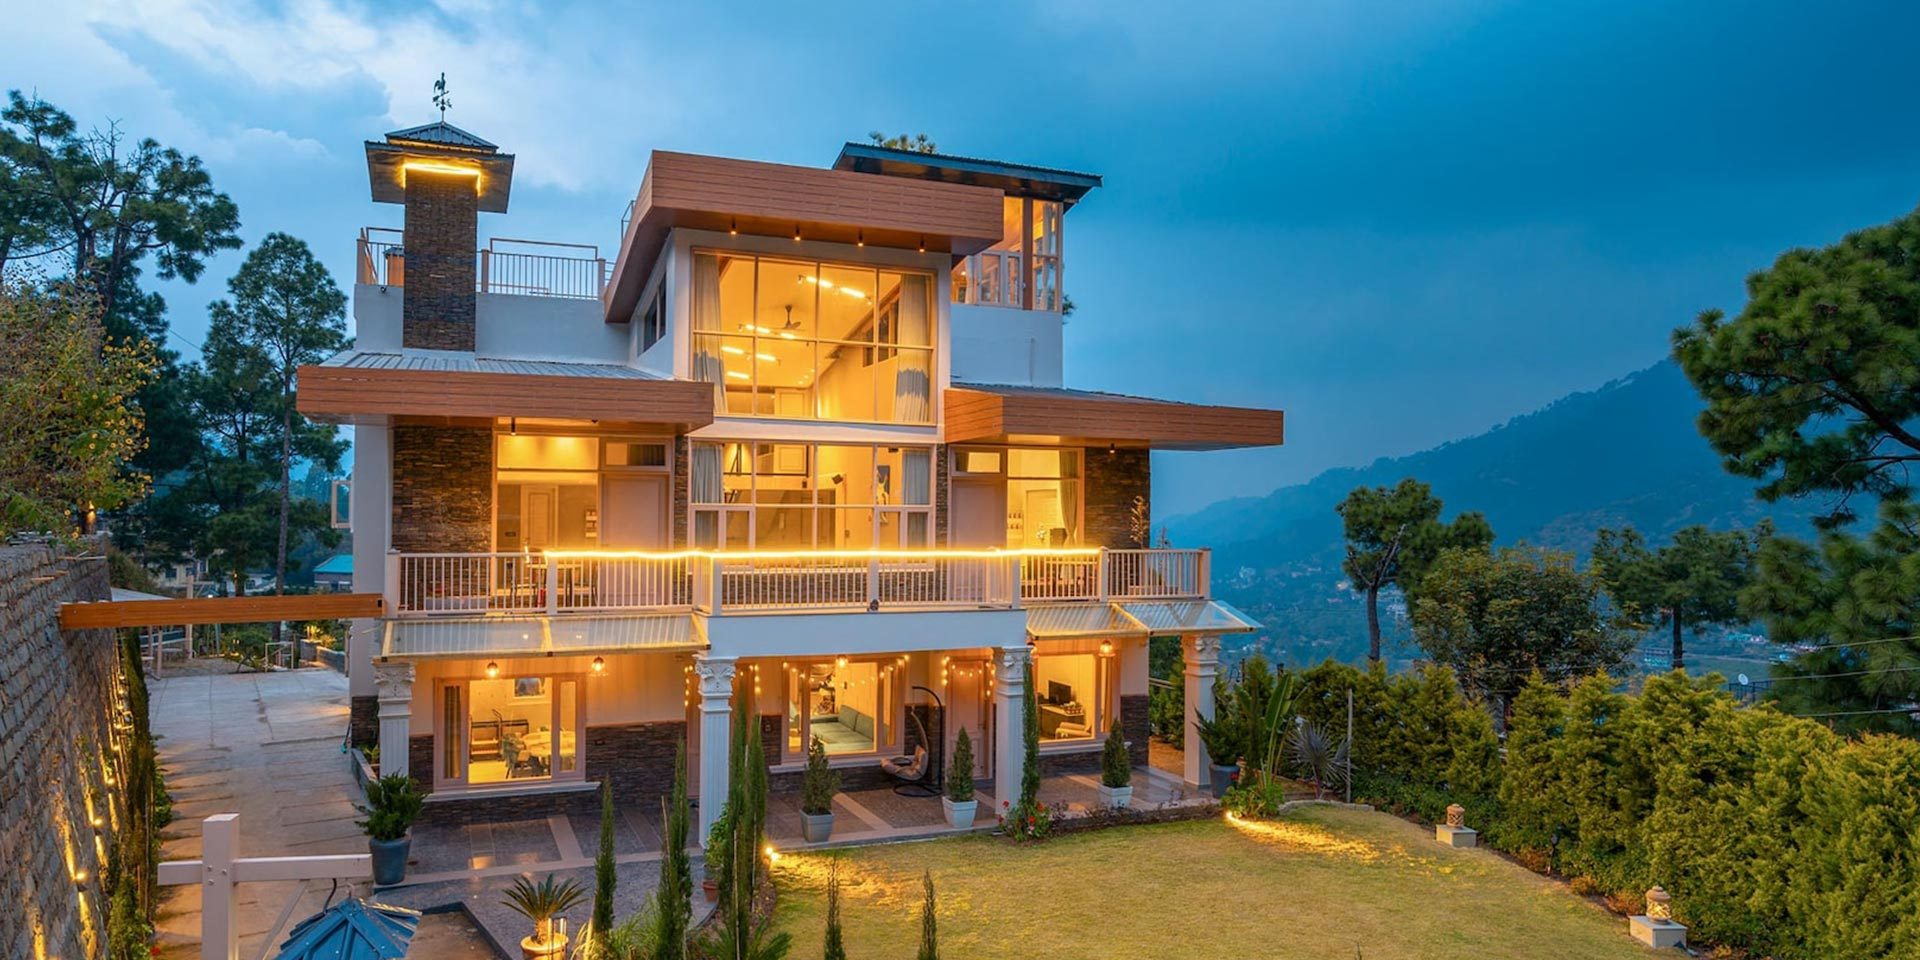 The Top 5 Villas in Kasauli with Breathtaking Views and Amenities